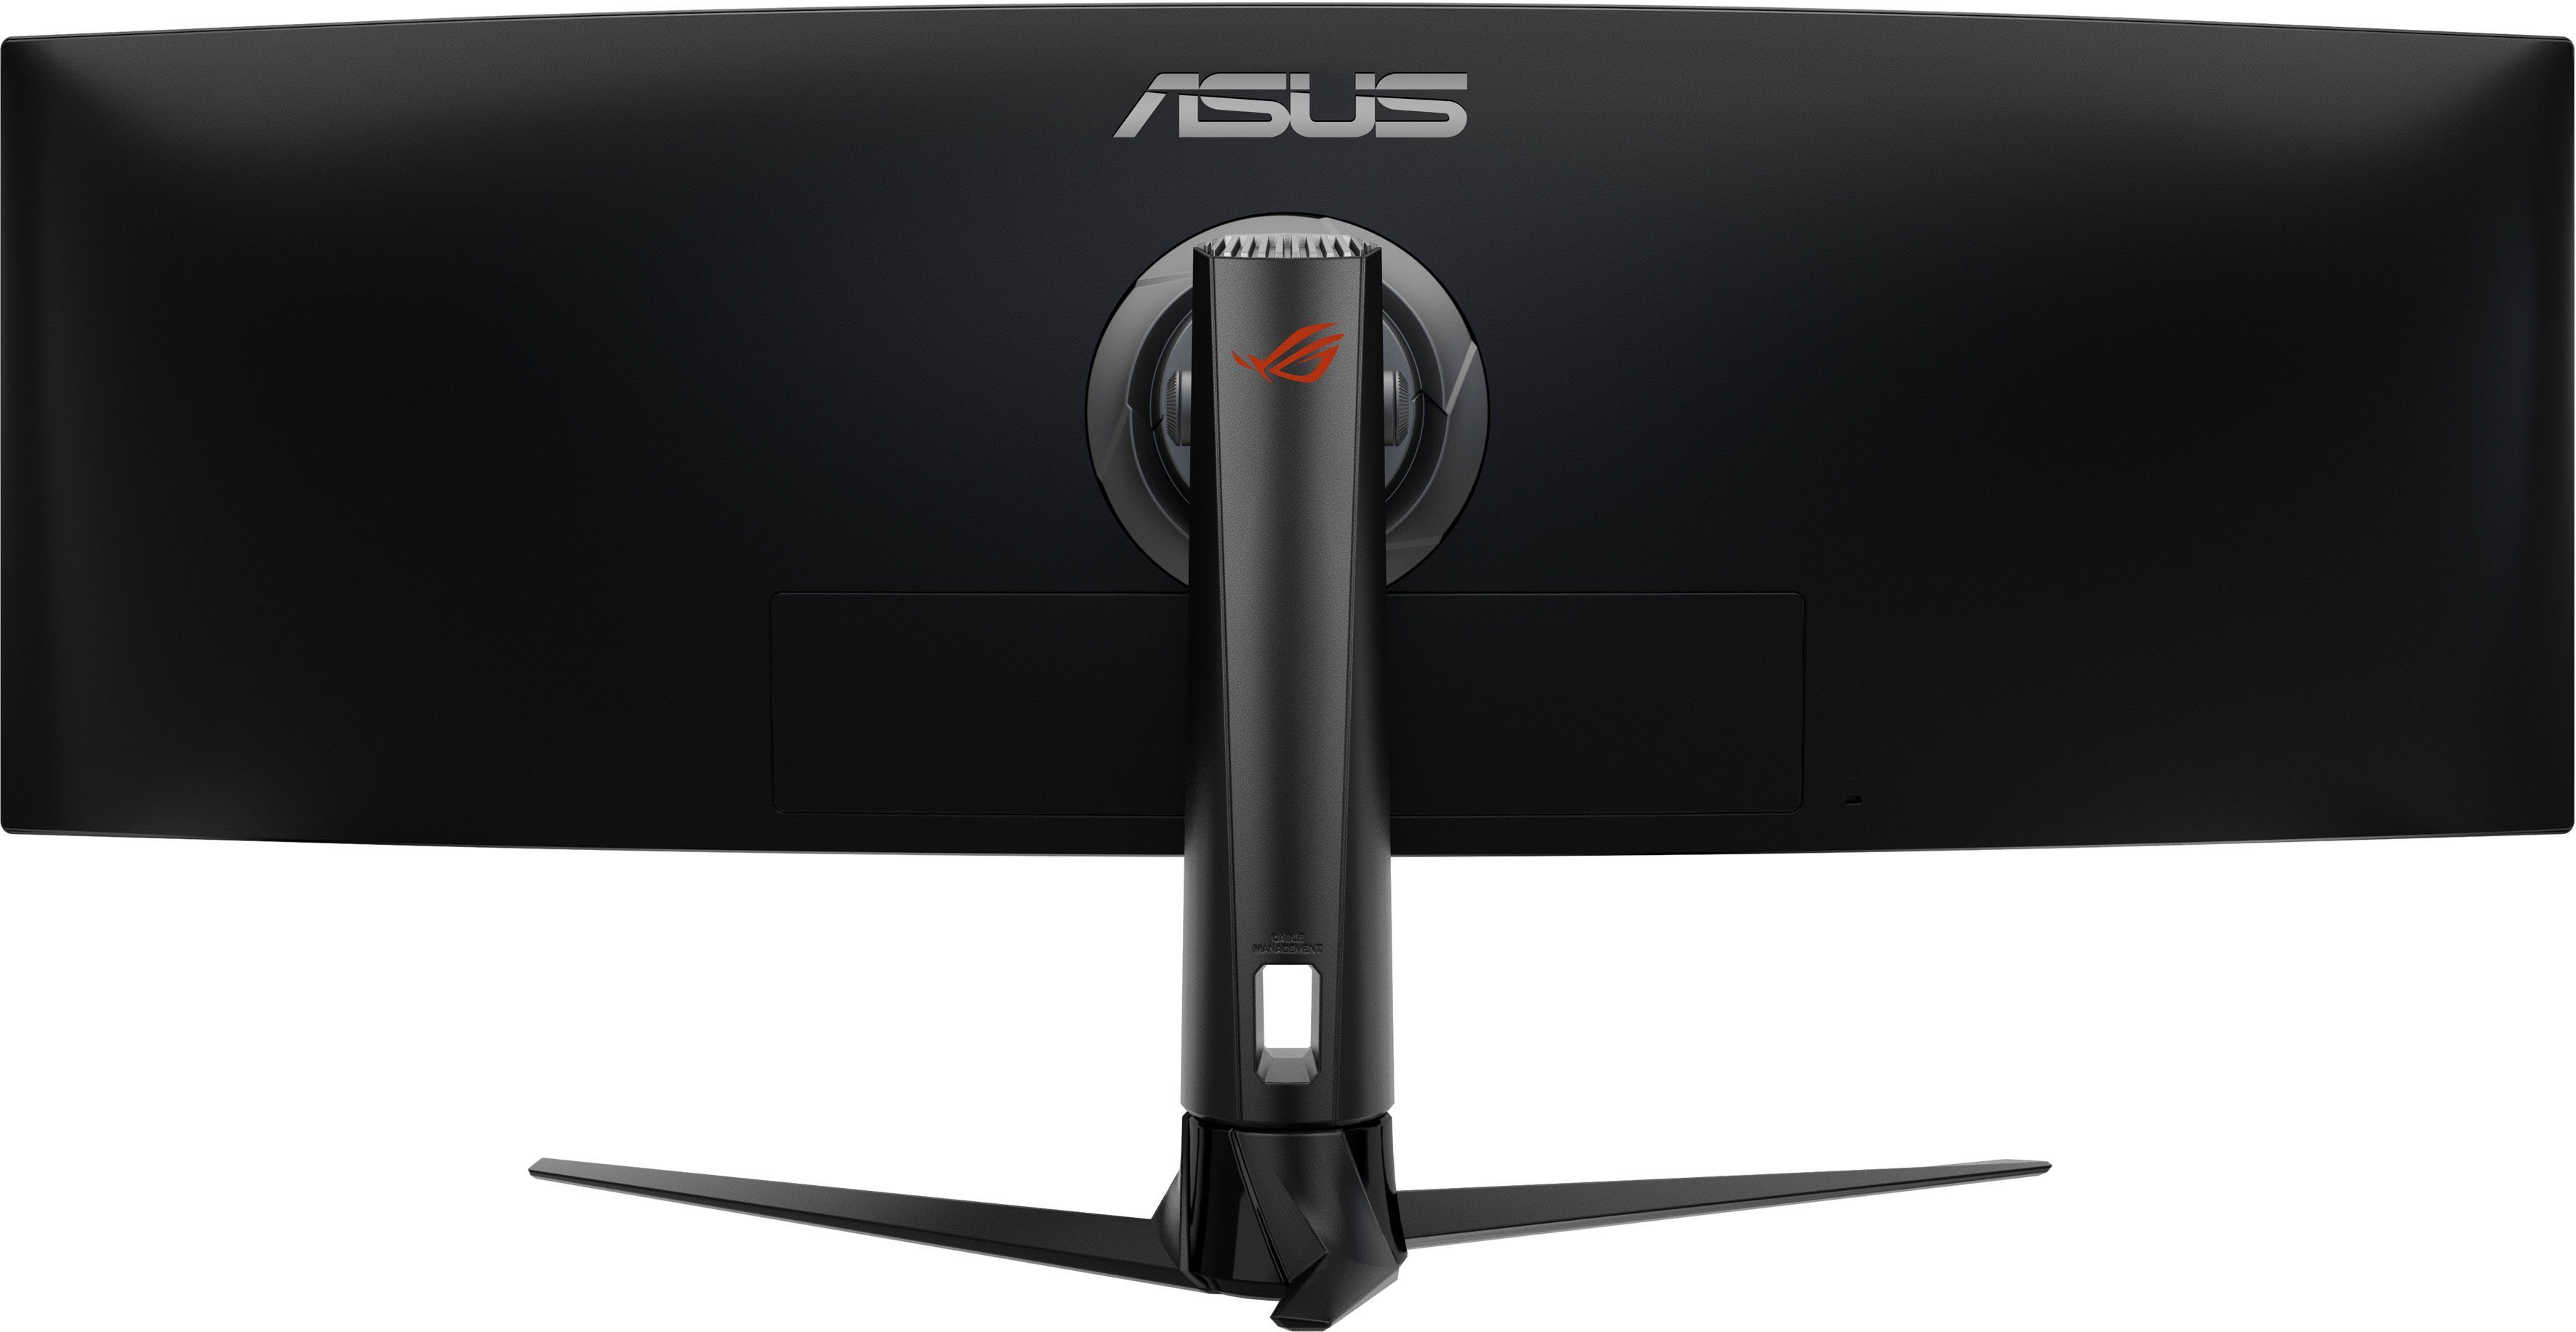 cm/49 px, Asus 1080 HD, ", 4 (124,46 LED, ms 3840 Full VA Hz, XG49VQ 144 Gaming Reaktionszeit, Monitor) Curved-Gaming-Monitor x